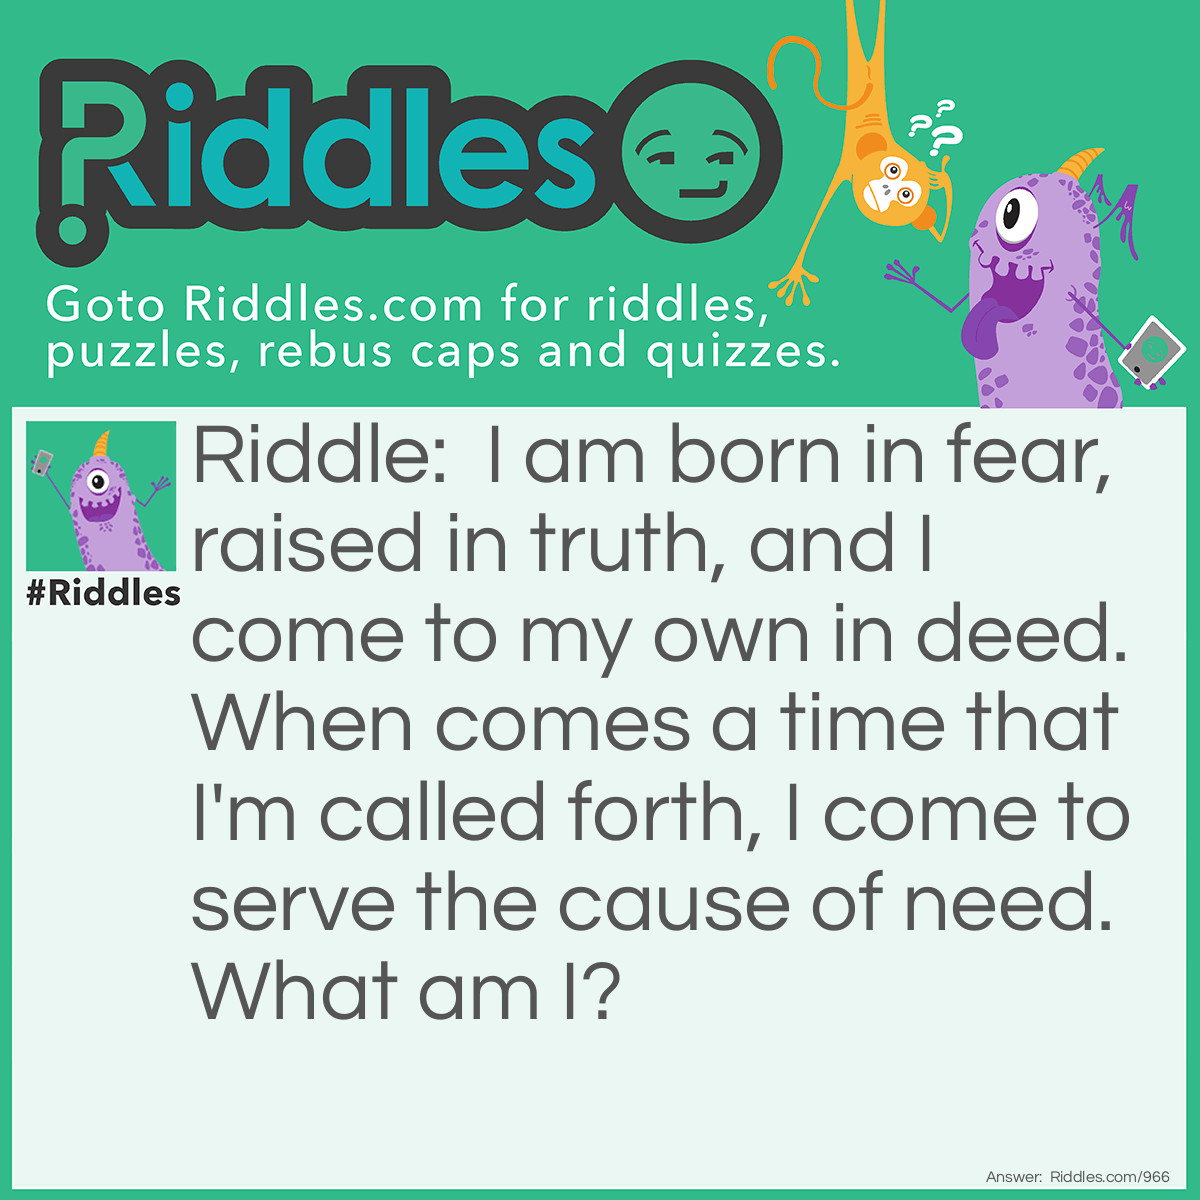 Riddle: I am born in fear, raised in truth, and I come to my own in deed. When comes a time that I'm called forth, I come to serve the cause of need.
What am I? Answer: Courage.